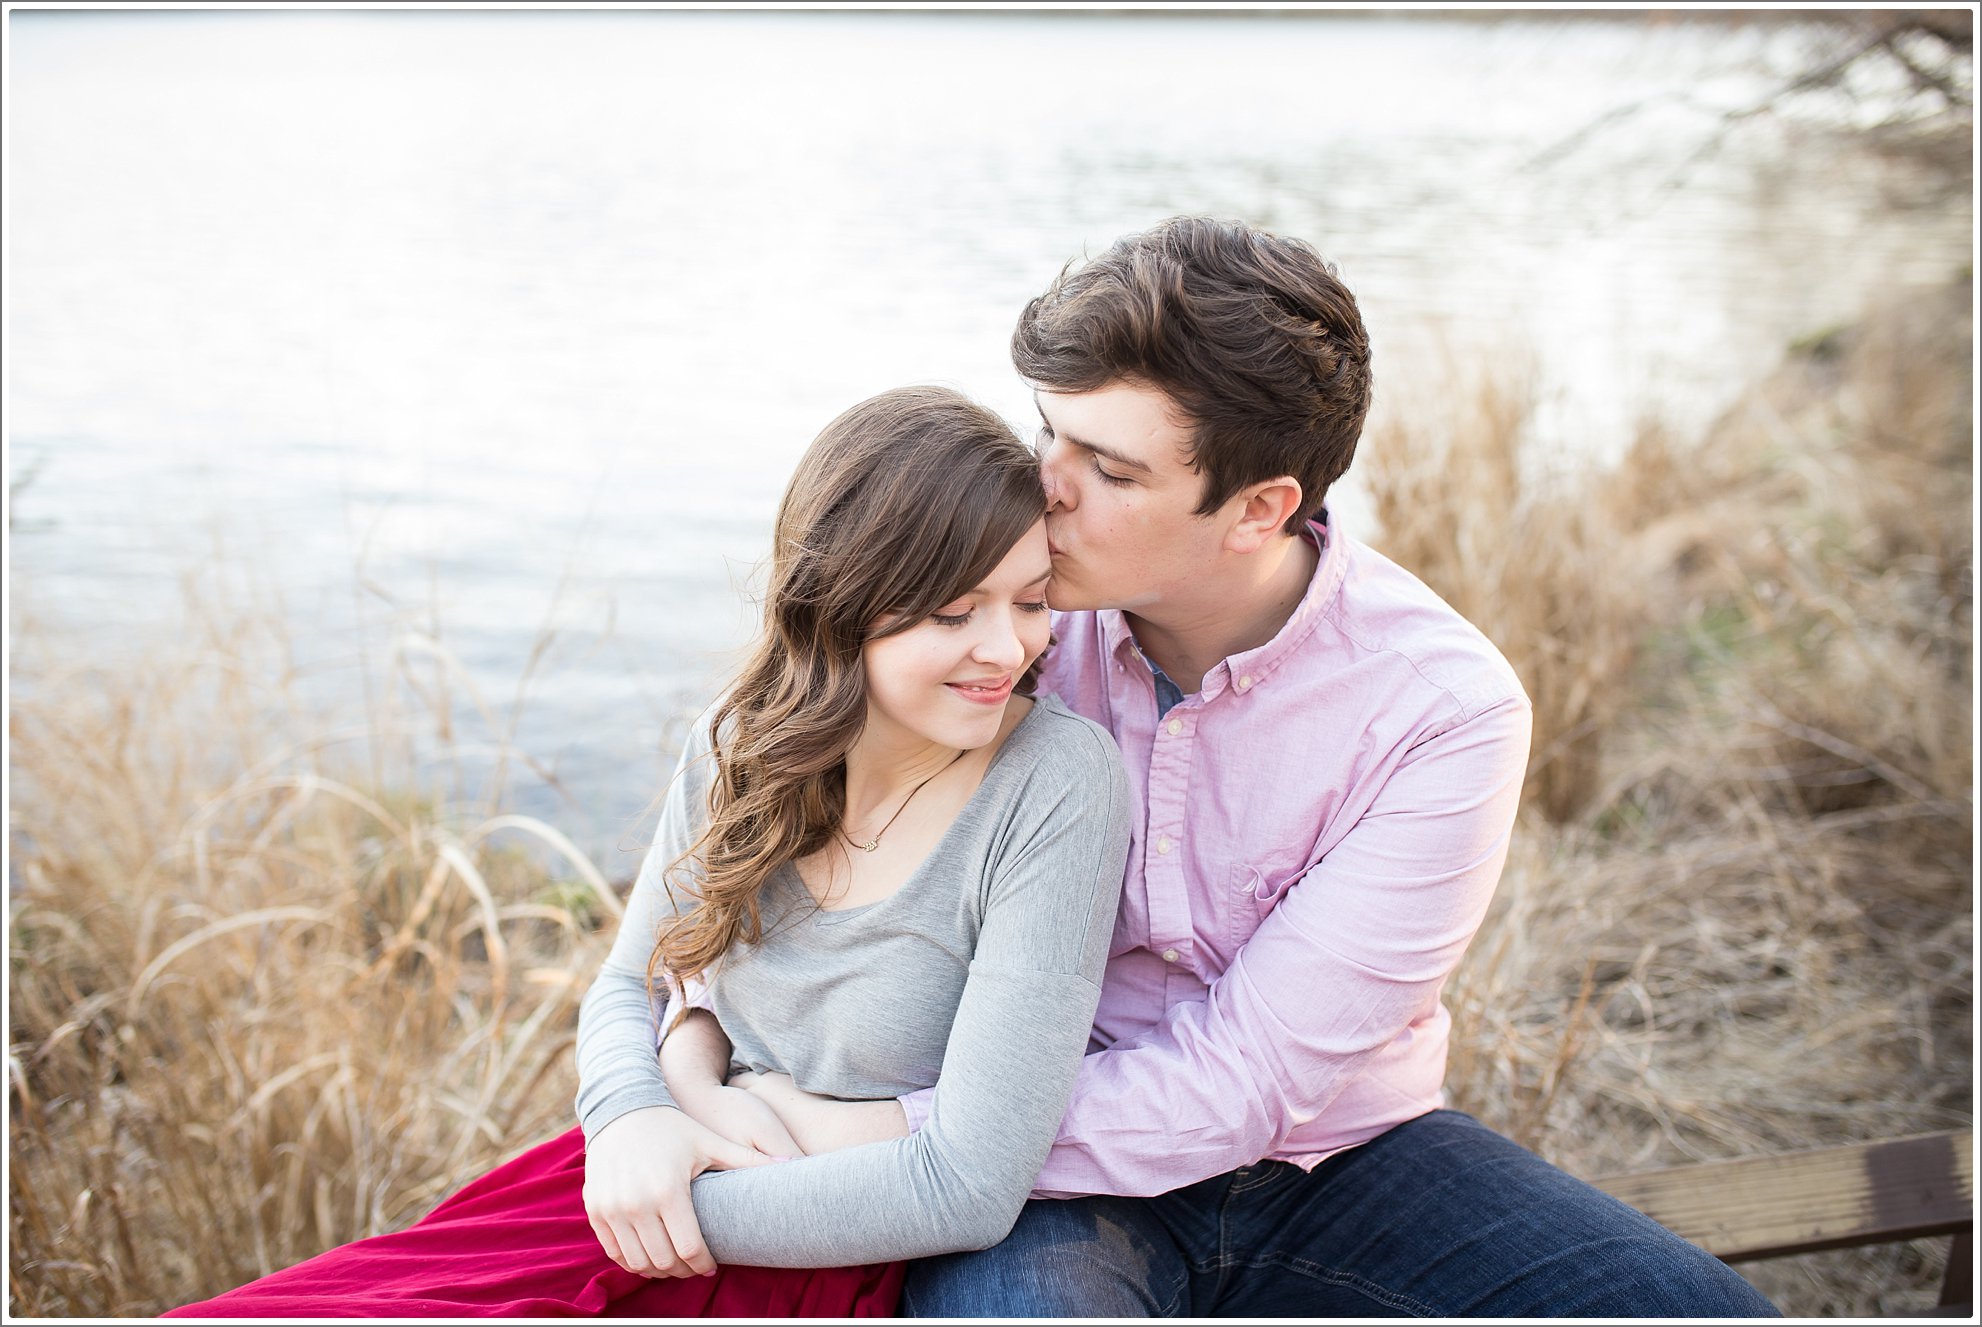 Early Spring Engagement Session at Radnor Lake